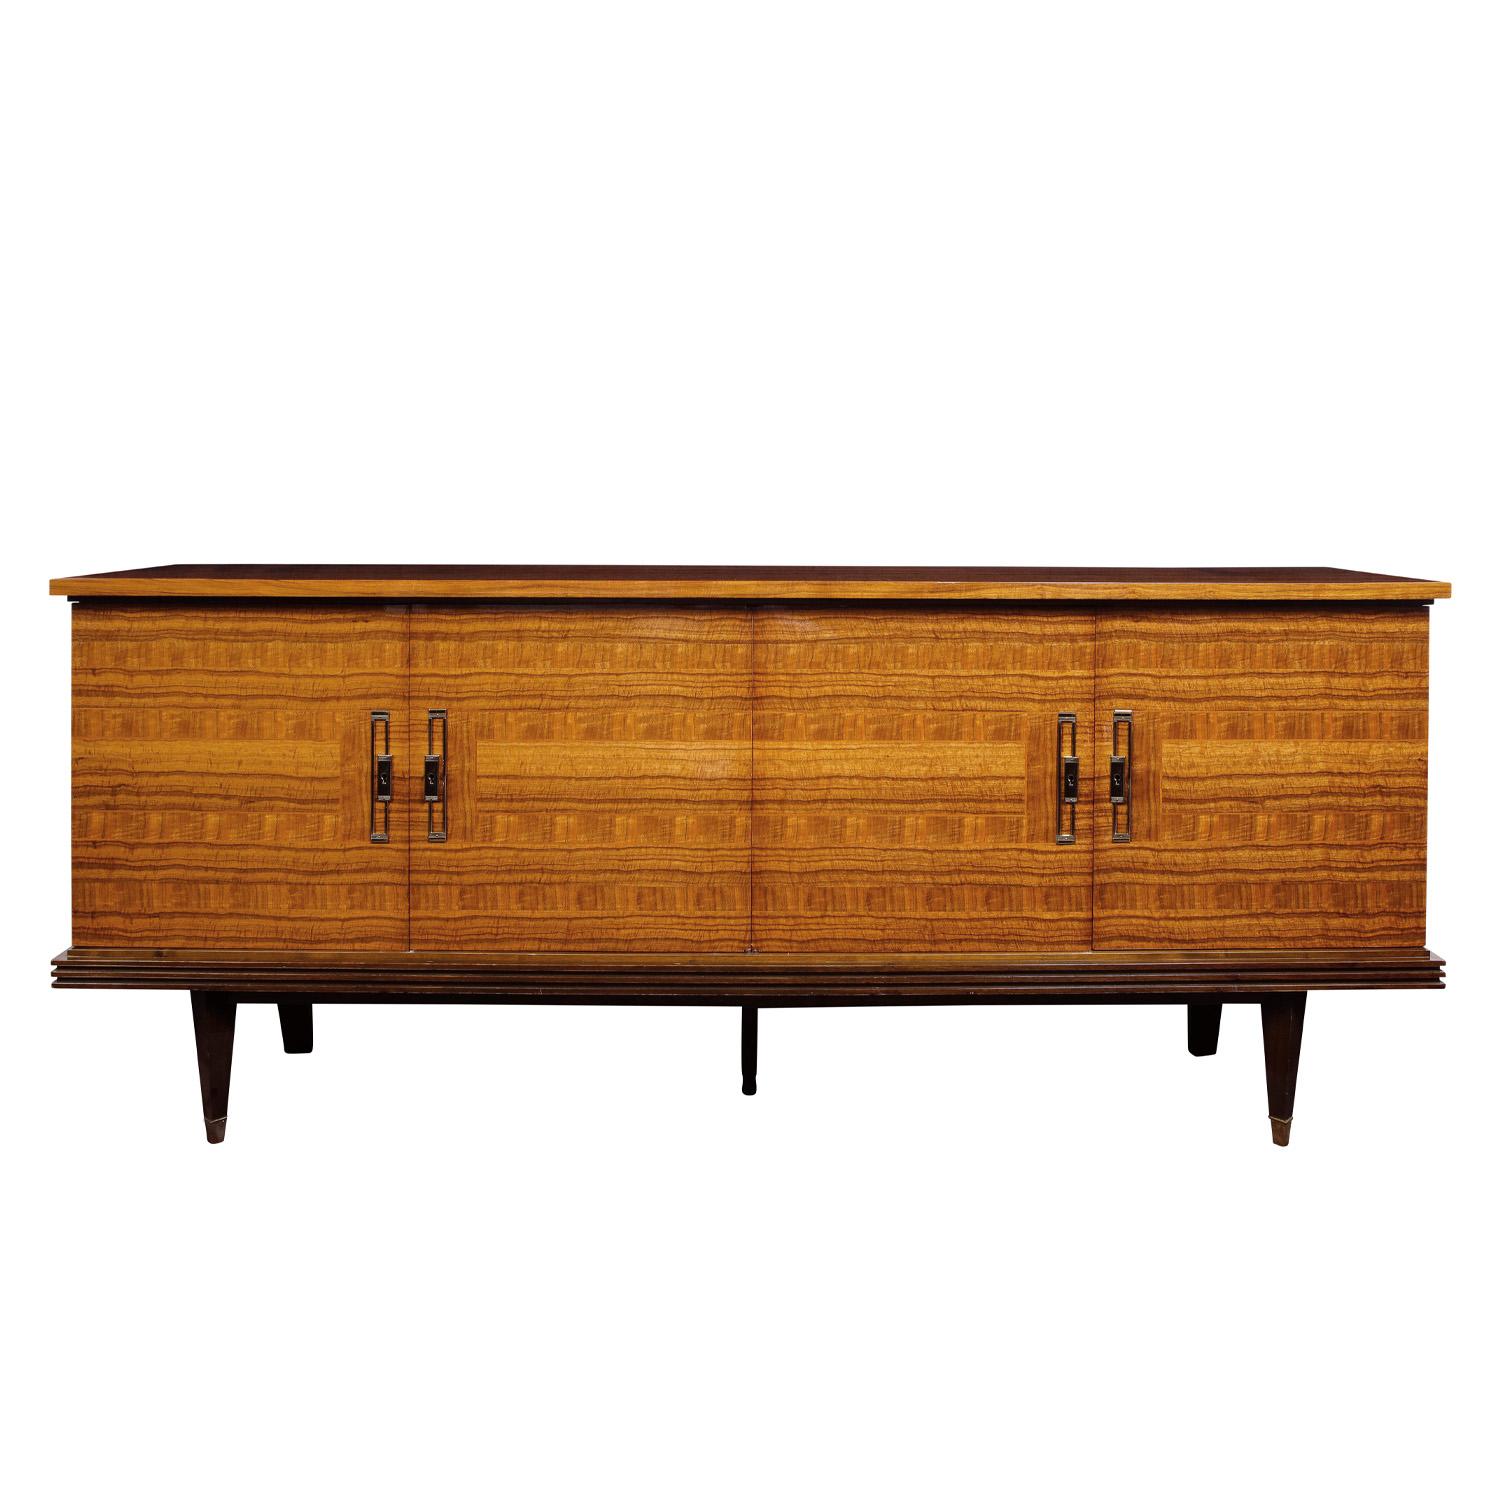 Superb large 4 door credenza with artisan hand-set marquetry and inlays in French walnut with brass hardware by MEUROPAM, France 1950's (label reads “MEUROPAM” inside door). The marquetry and inlays create an intricate pattern that is meticulously